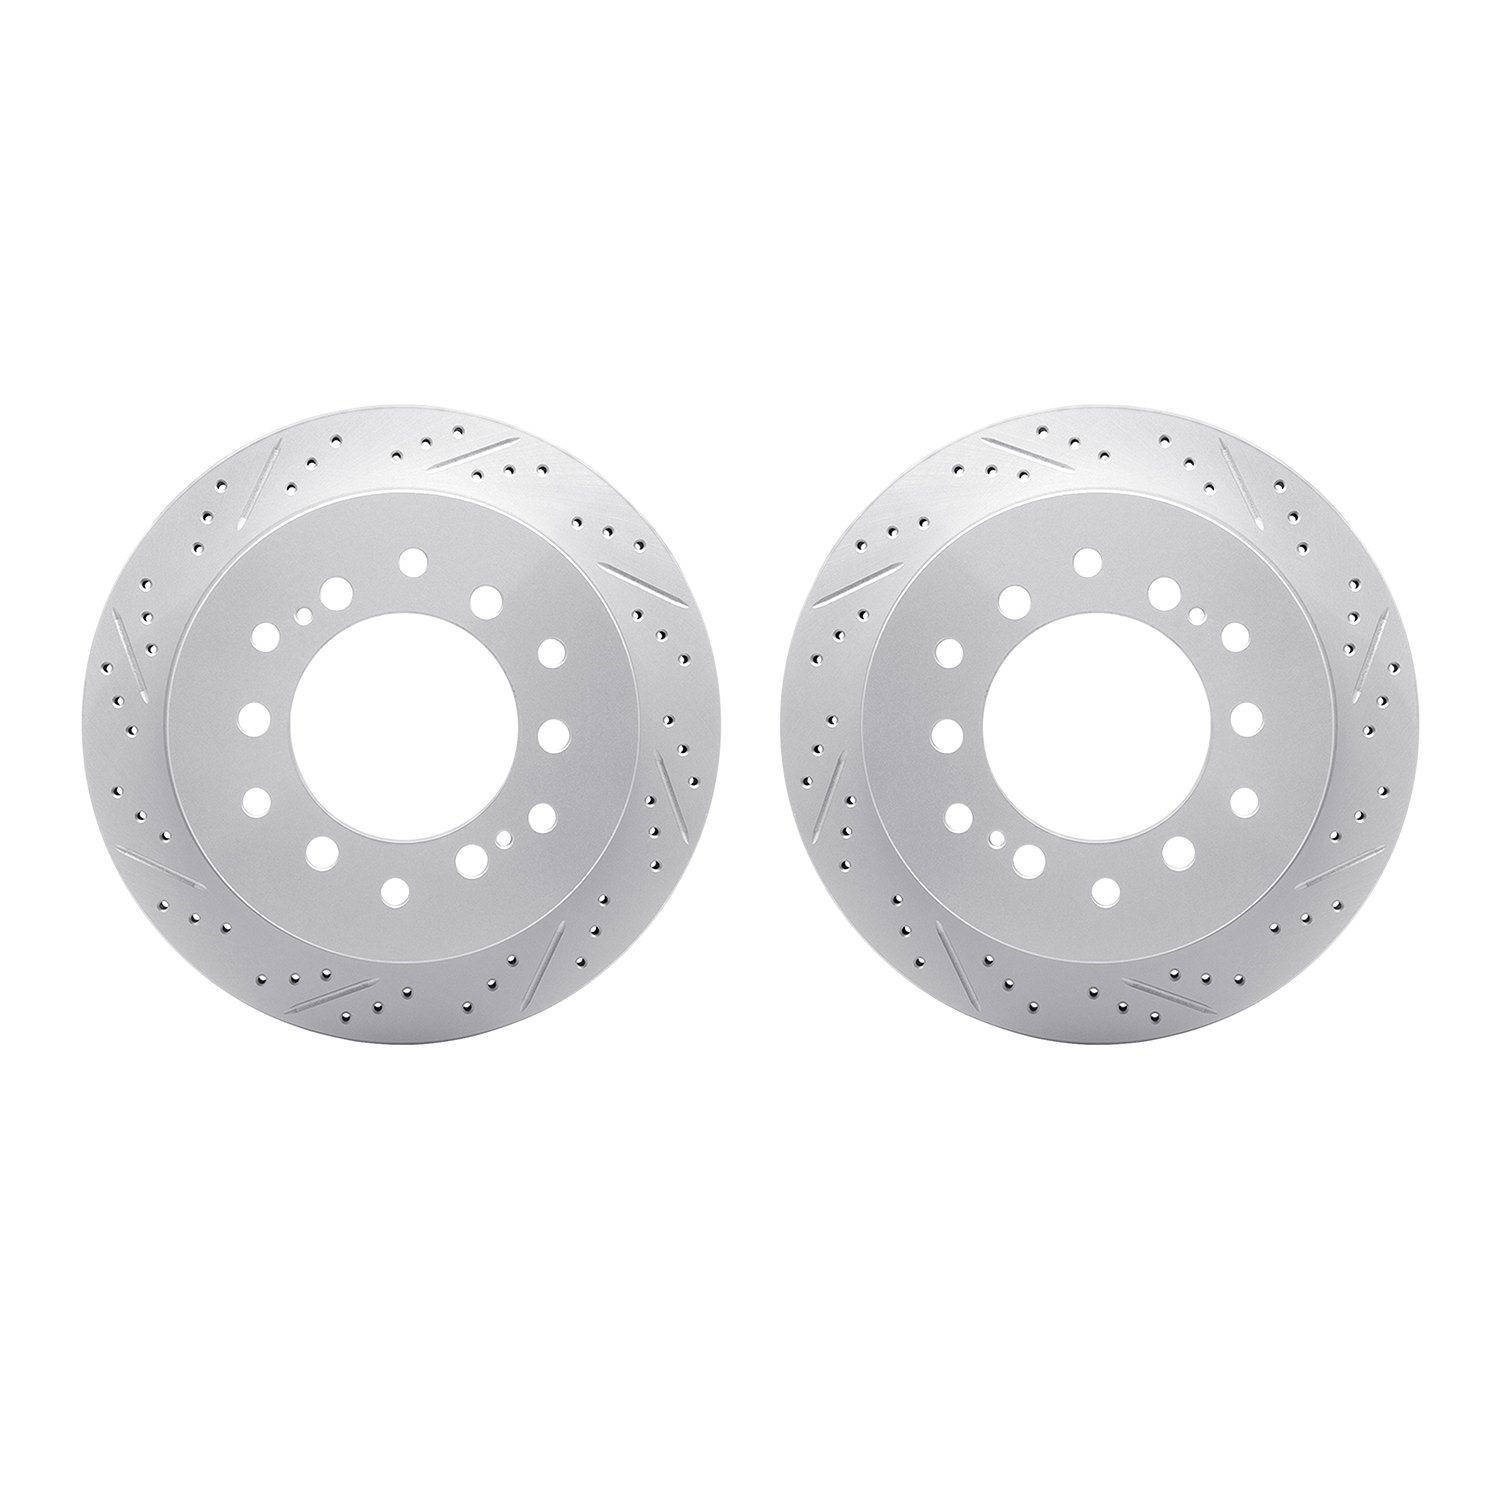 2002-76046 Geoperformance Drilled/Slotted Brake Rotors, 2001-2009 Lexus/Toyota/Scion, Position: Rear